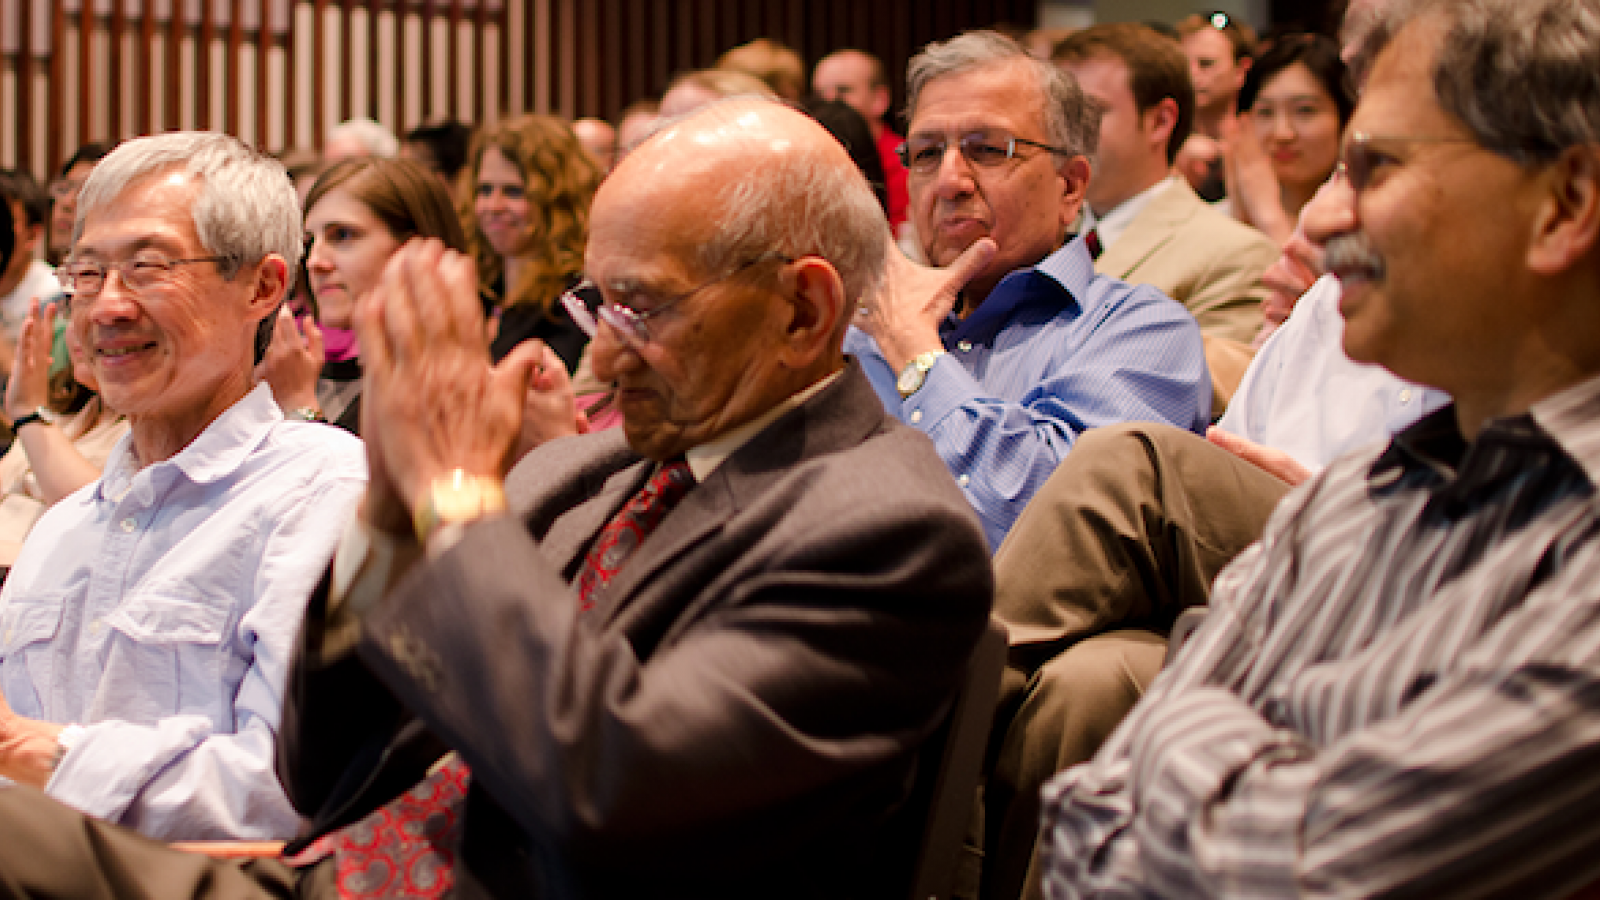 Dr. Jagdish S. Rustagi among the audience members at the 2012 lecture.